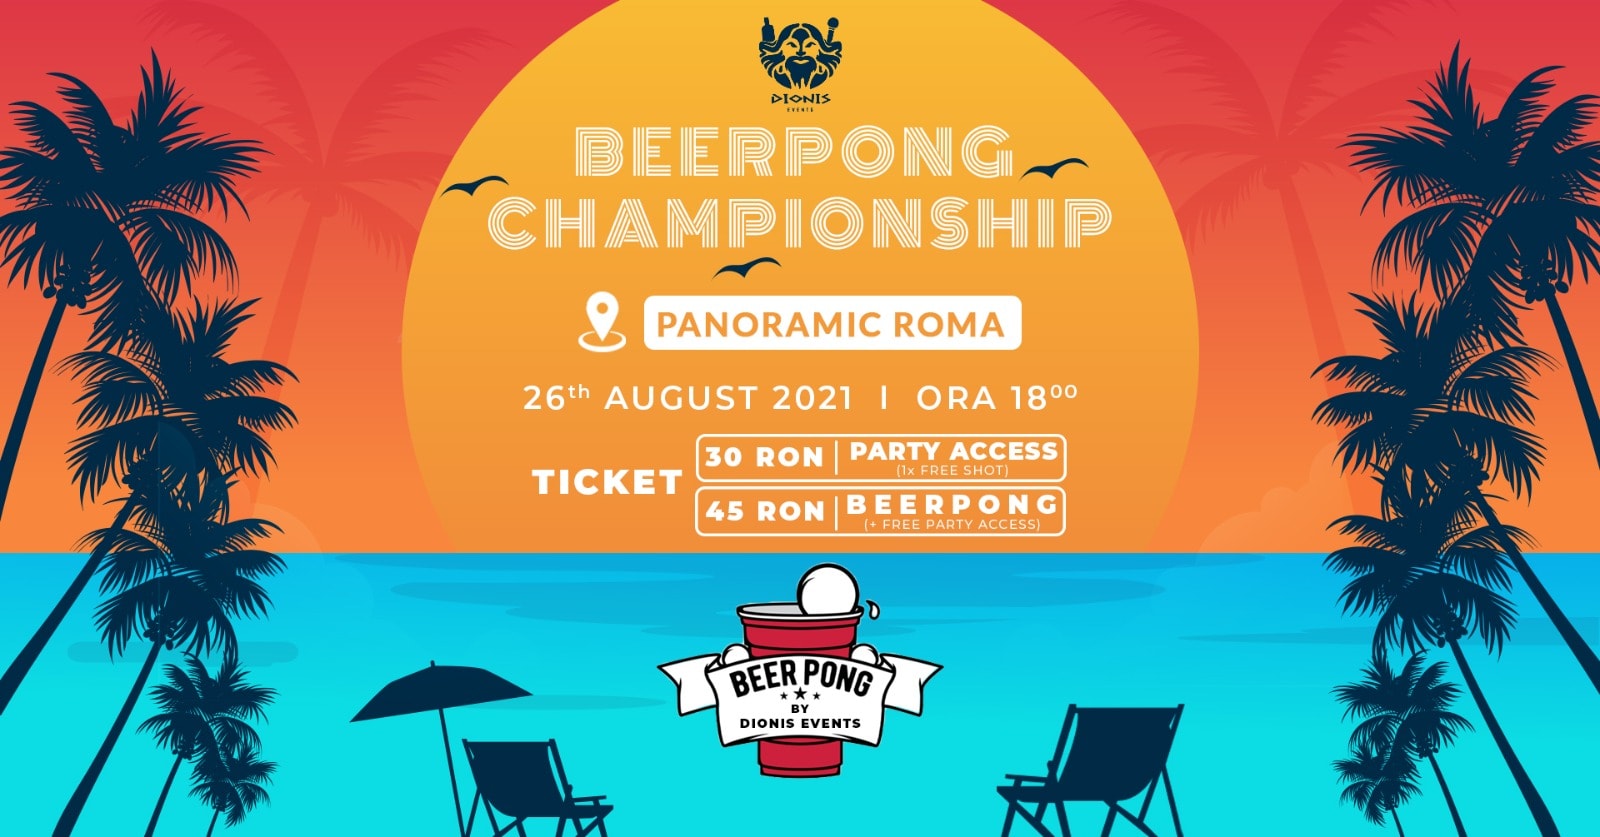 Beer Pong Championship By Dionis Events